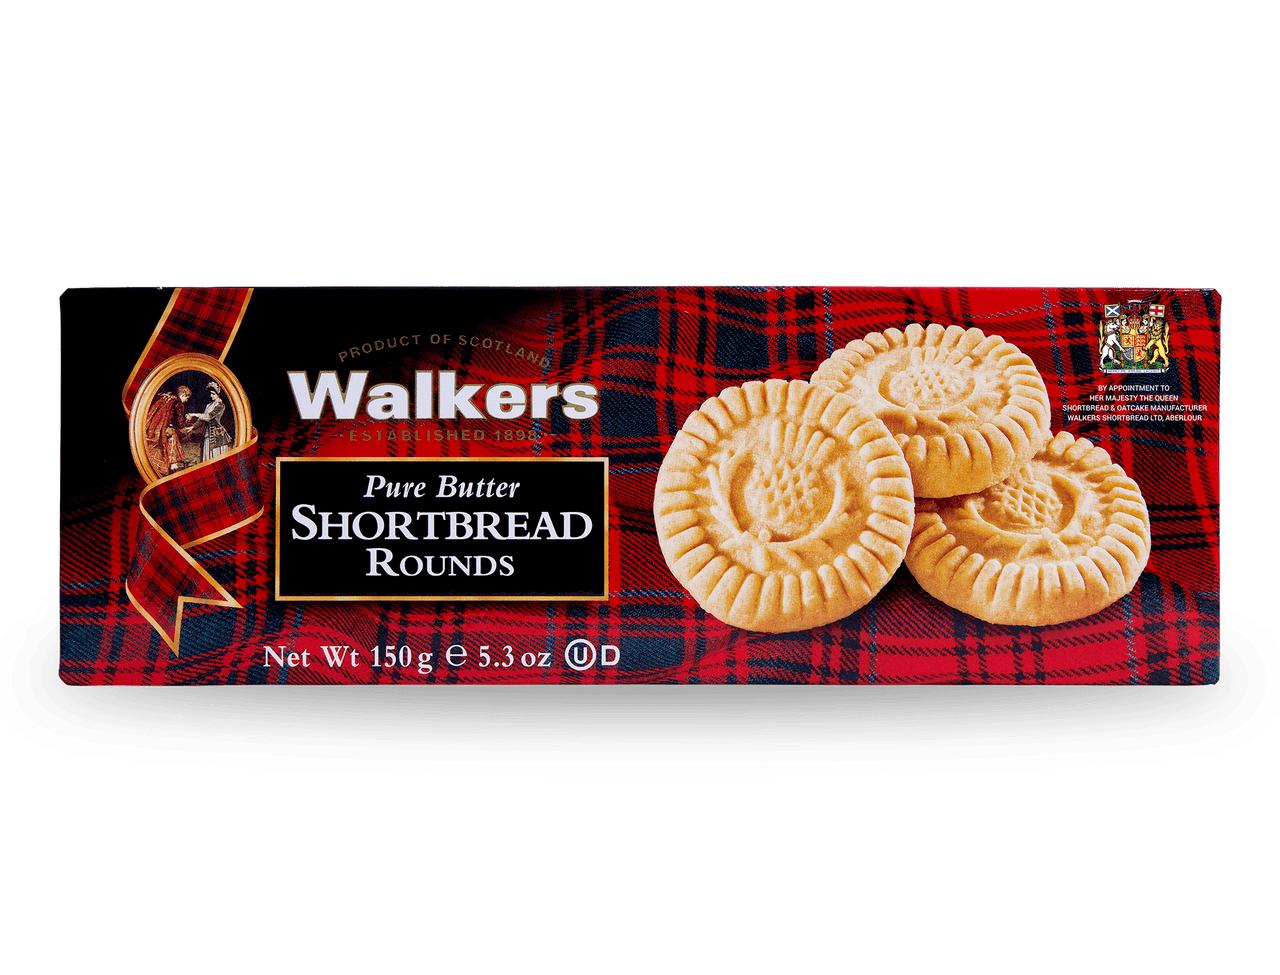 walkers-box-thistle-shortbread-rounds